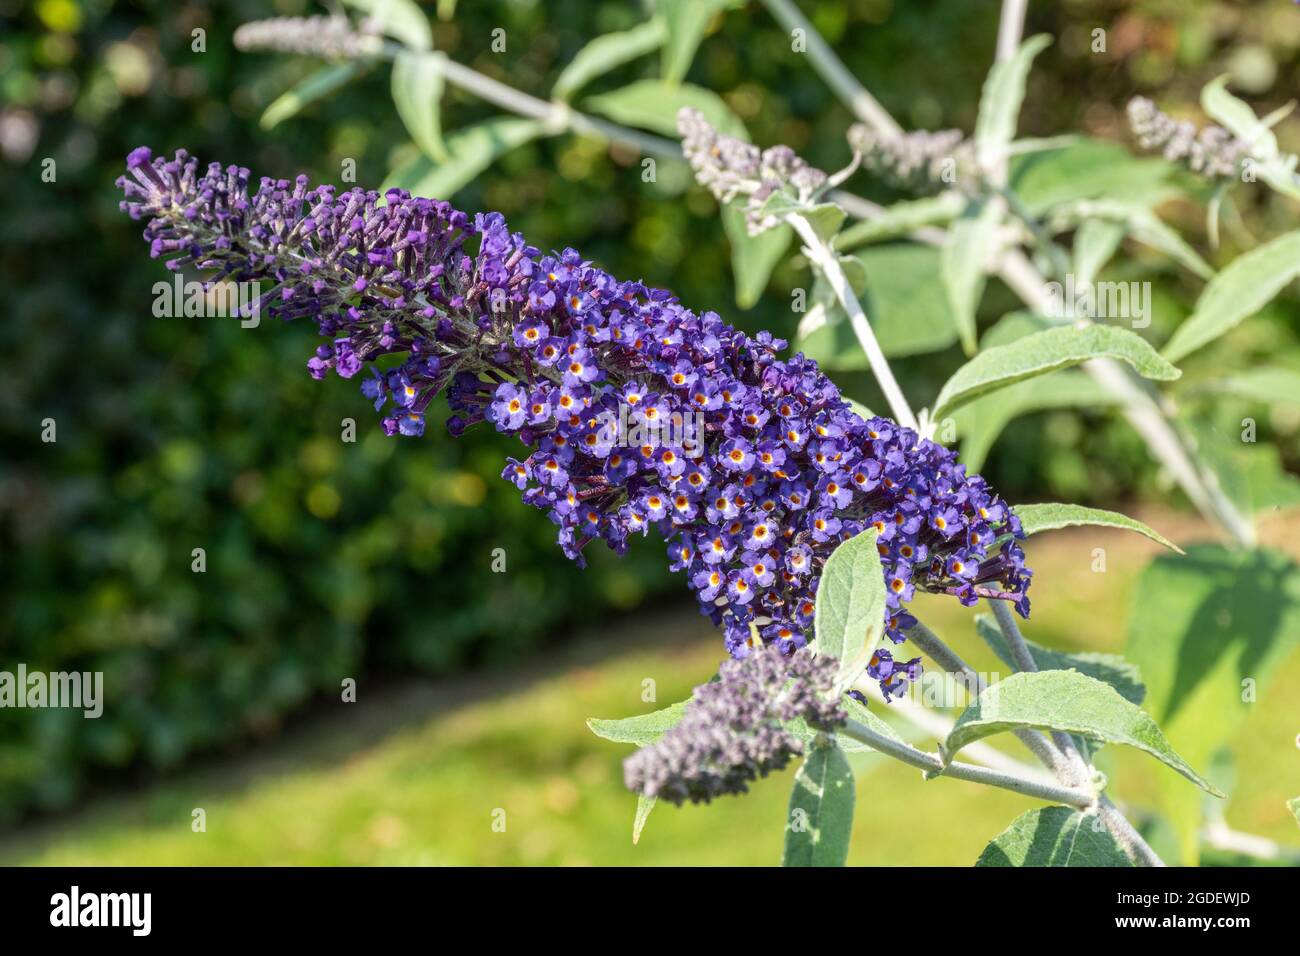 Buddleja davidii Orpheus (buddleia variety), known as a butterfly bush, in flower during august or summer, UK Stock Photo